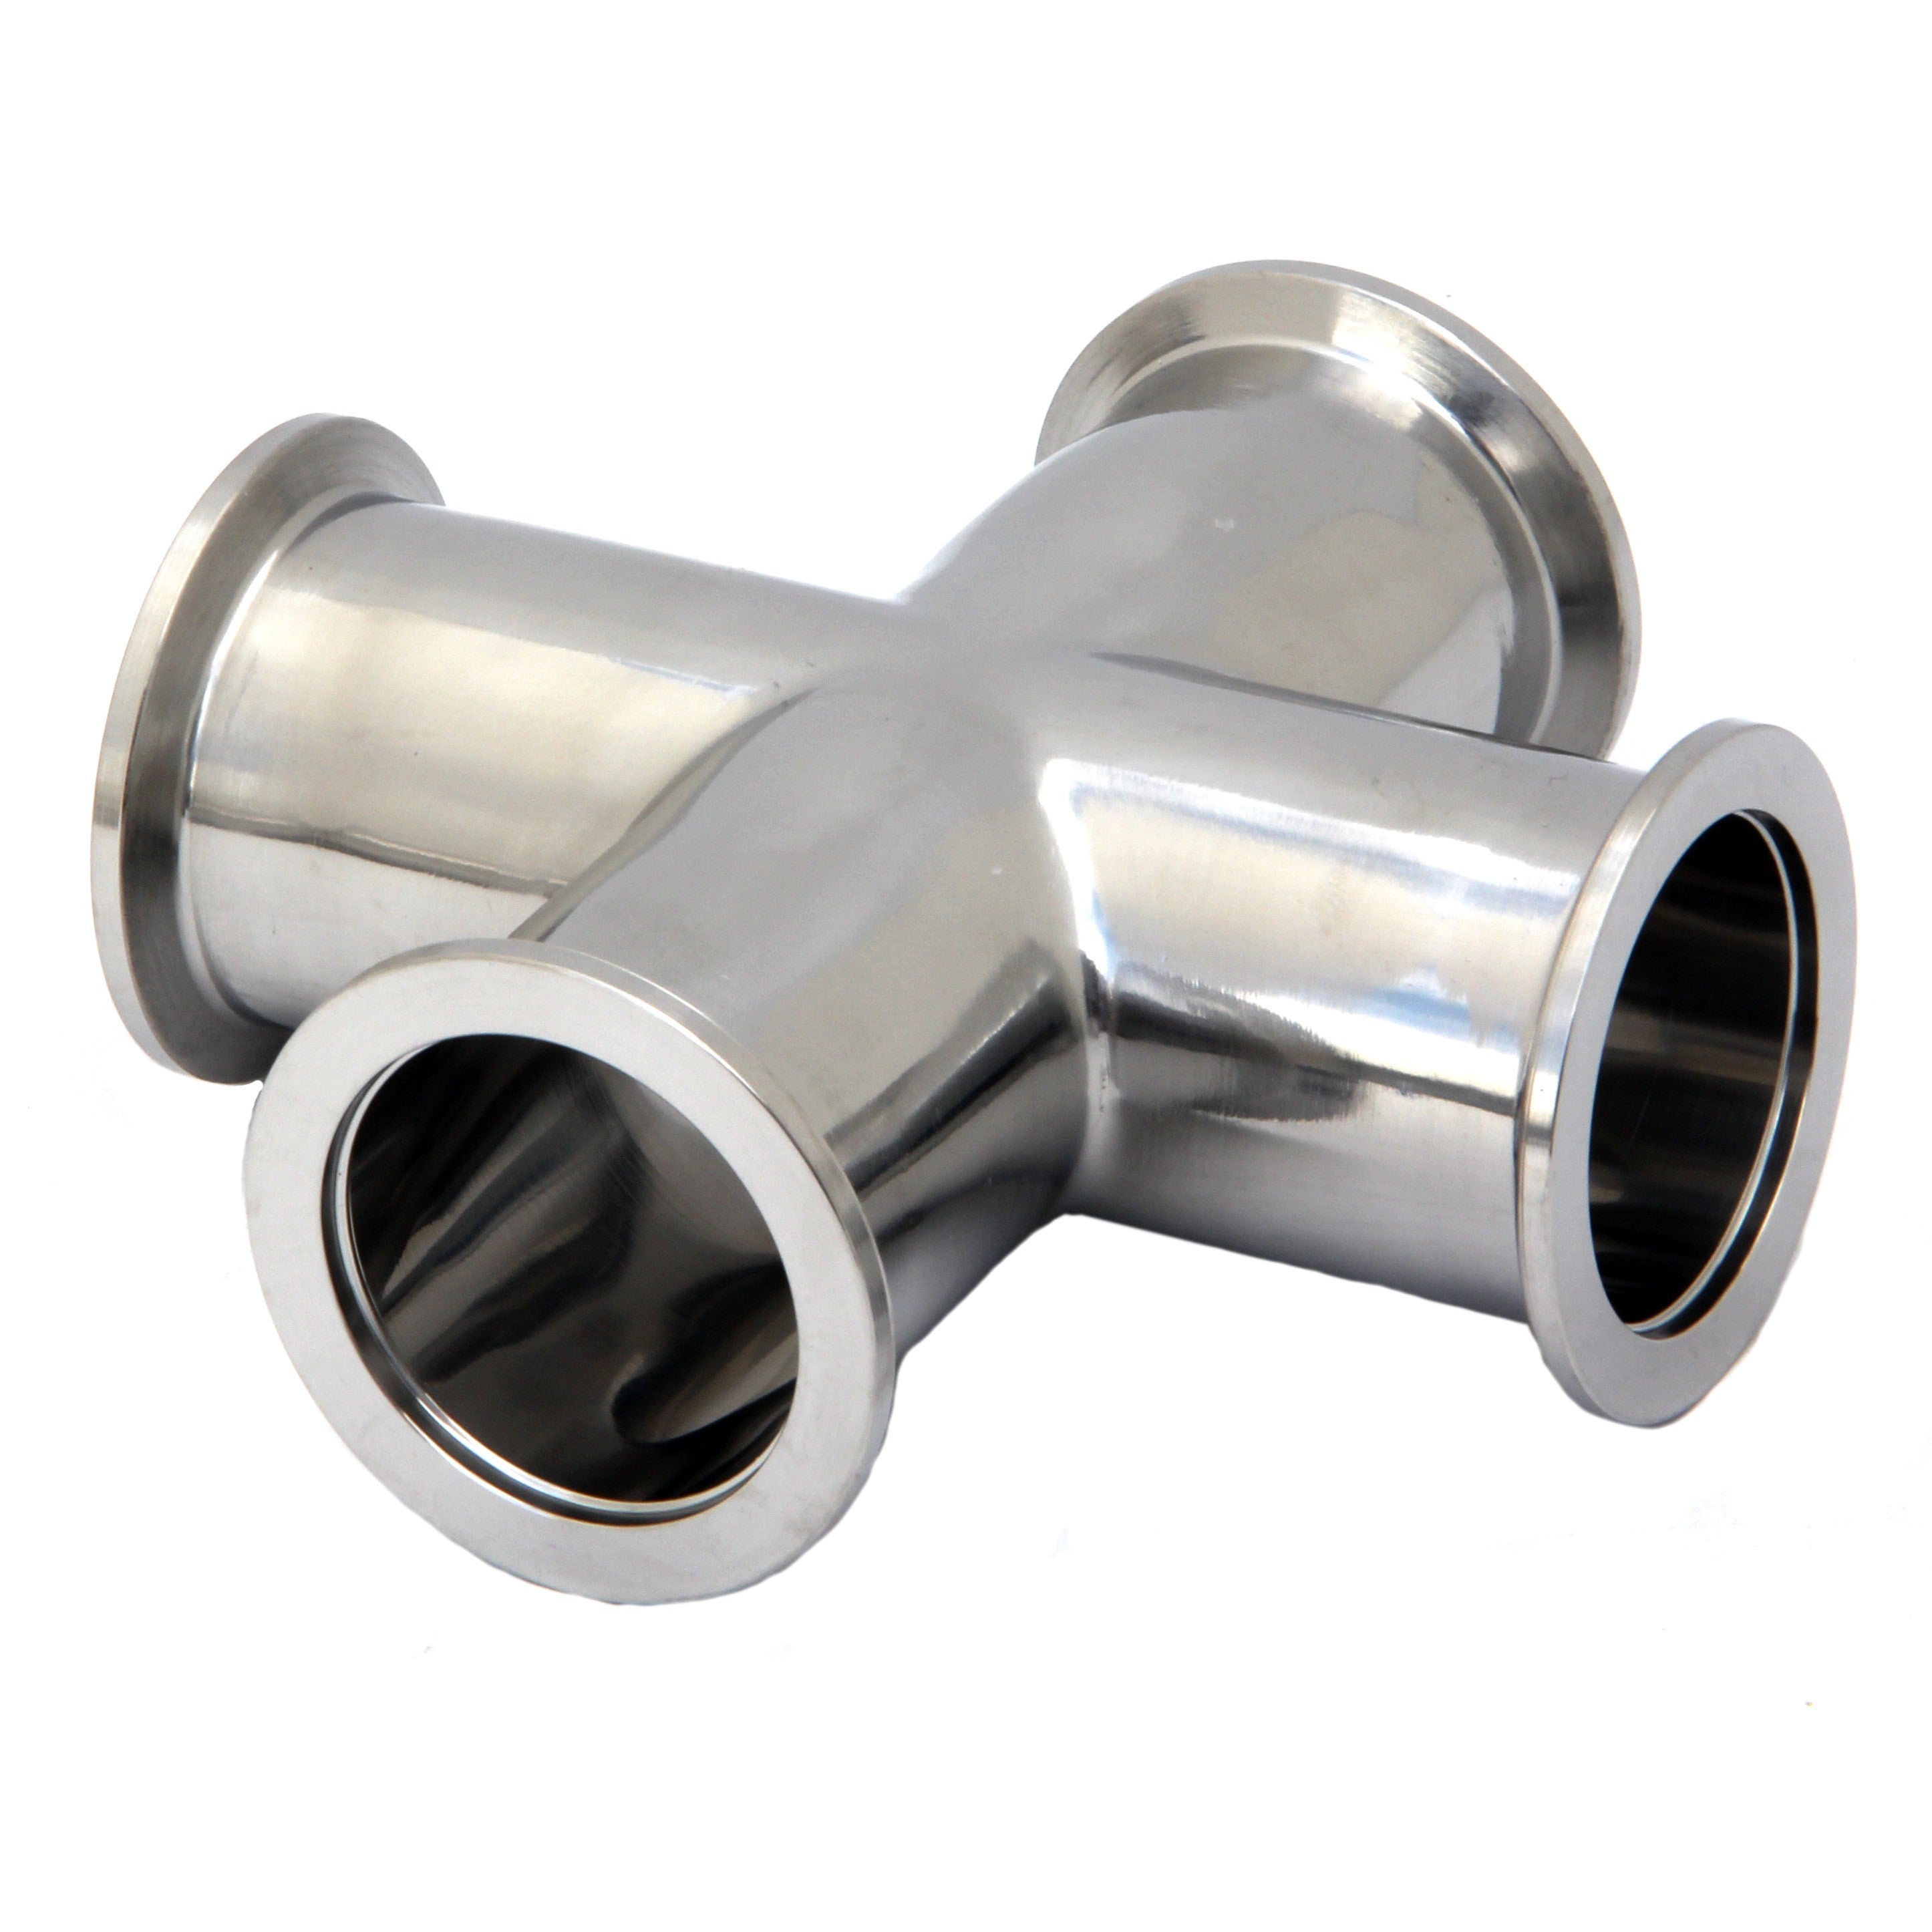 Hardware Factory Store Inc - KF / NW 4-Way Cross Fittings - [variant_title]